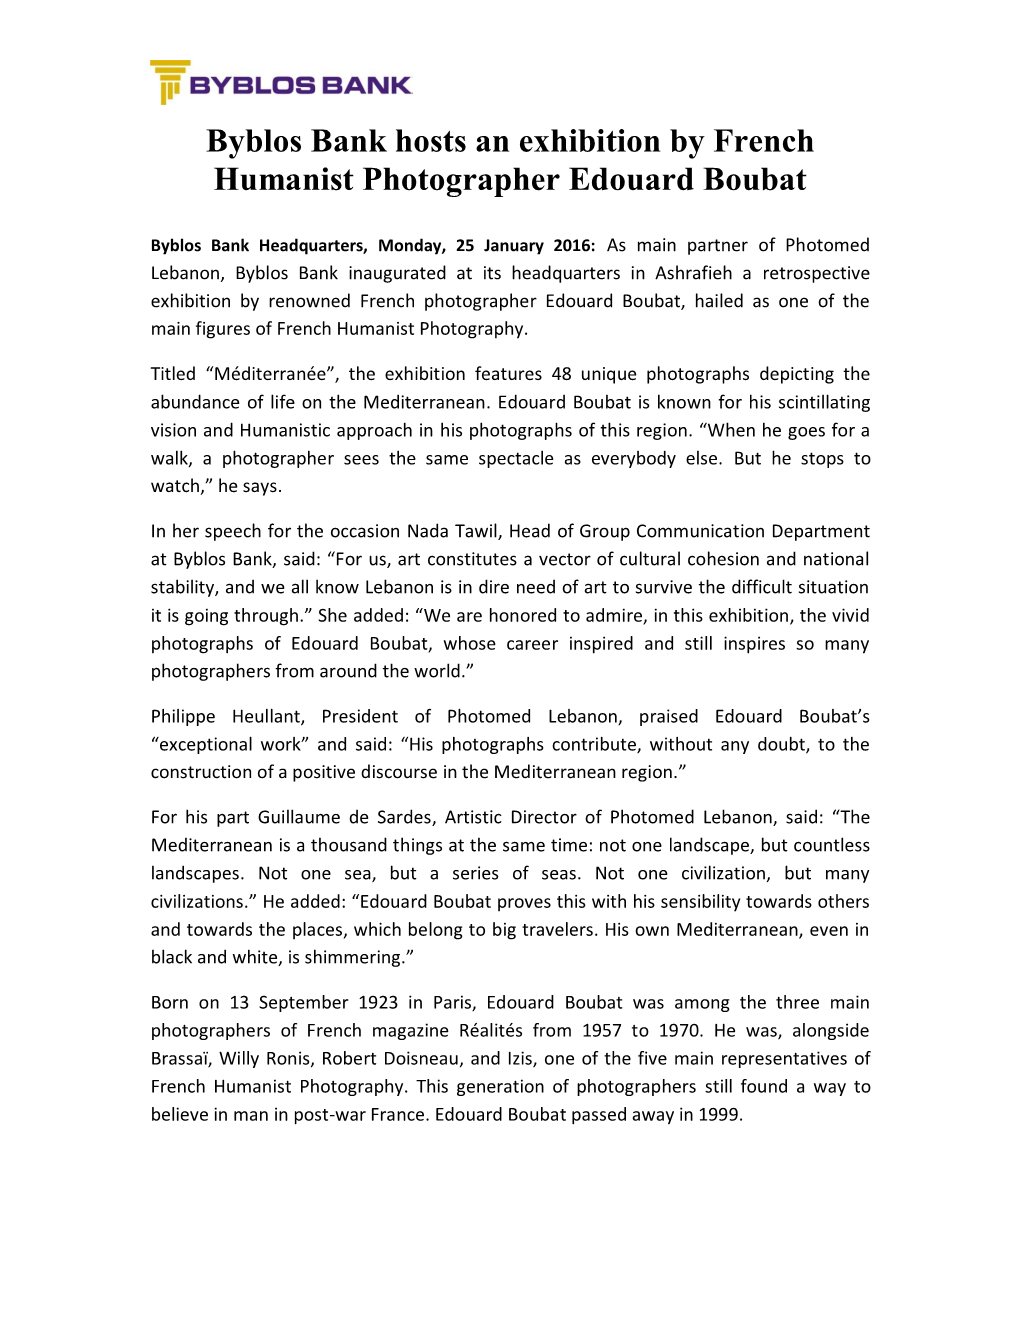 Byblos Bank Hosts an Exhibition by French Humanist Photographer Edouard Boubat